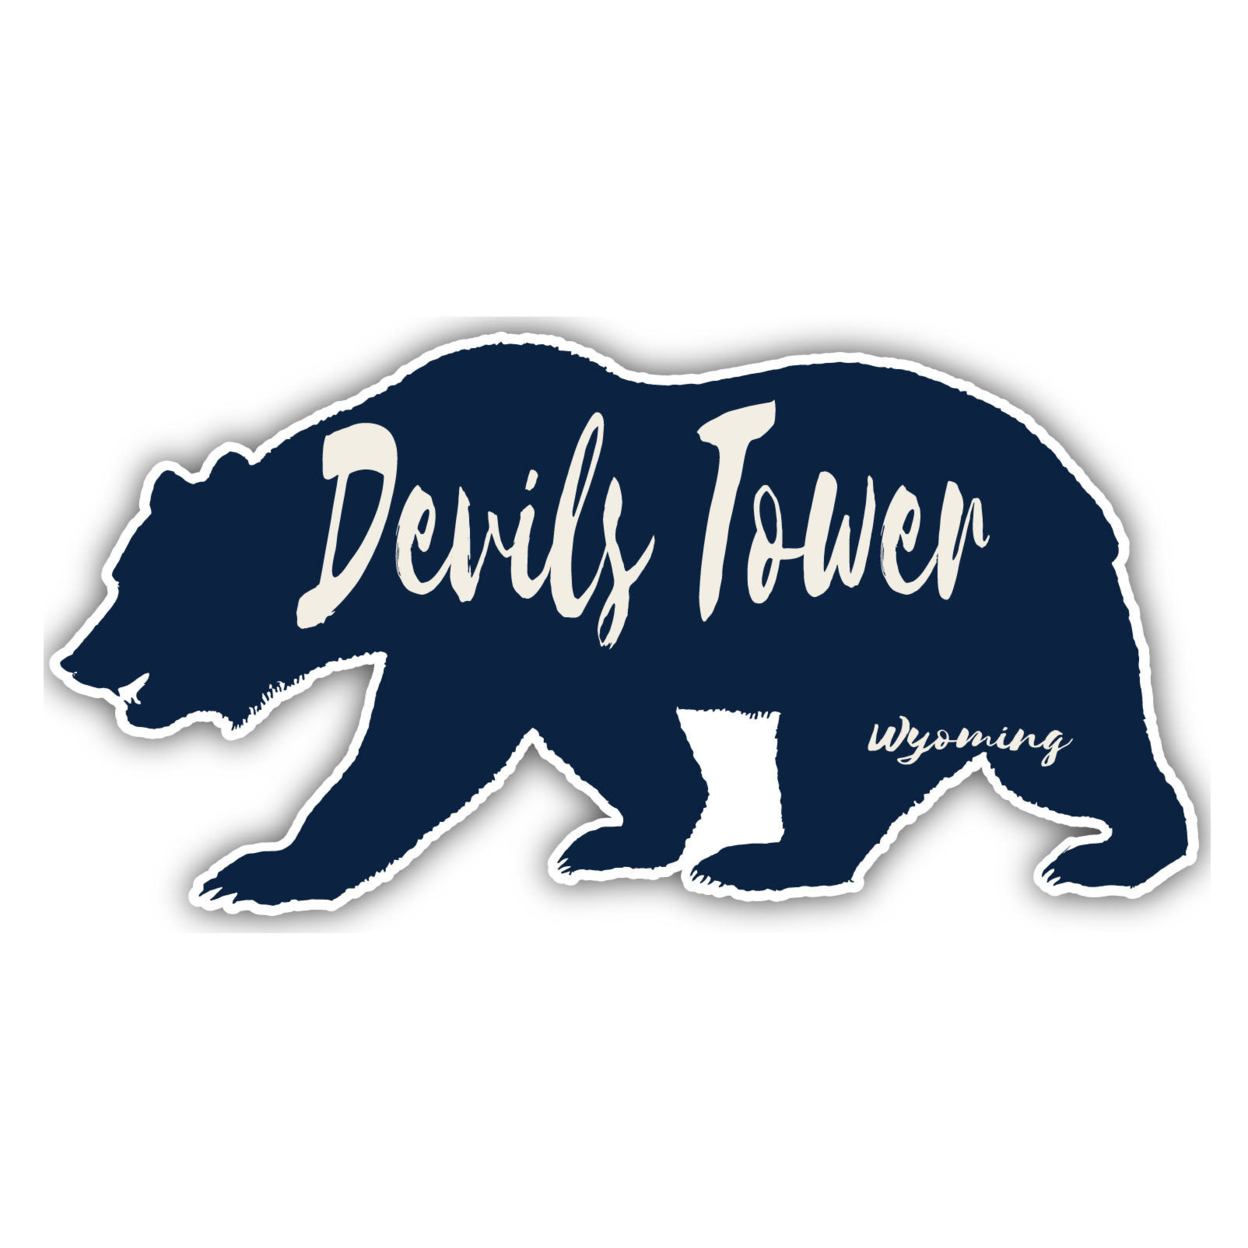 Devils Tower Wyoming Souvenir Decorative Stickers (Choose Theme And Size) - Single Unit, 12-Inch, Tent